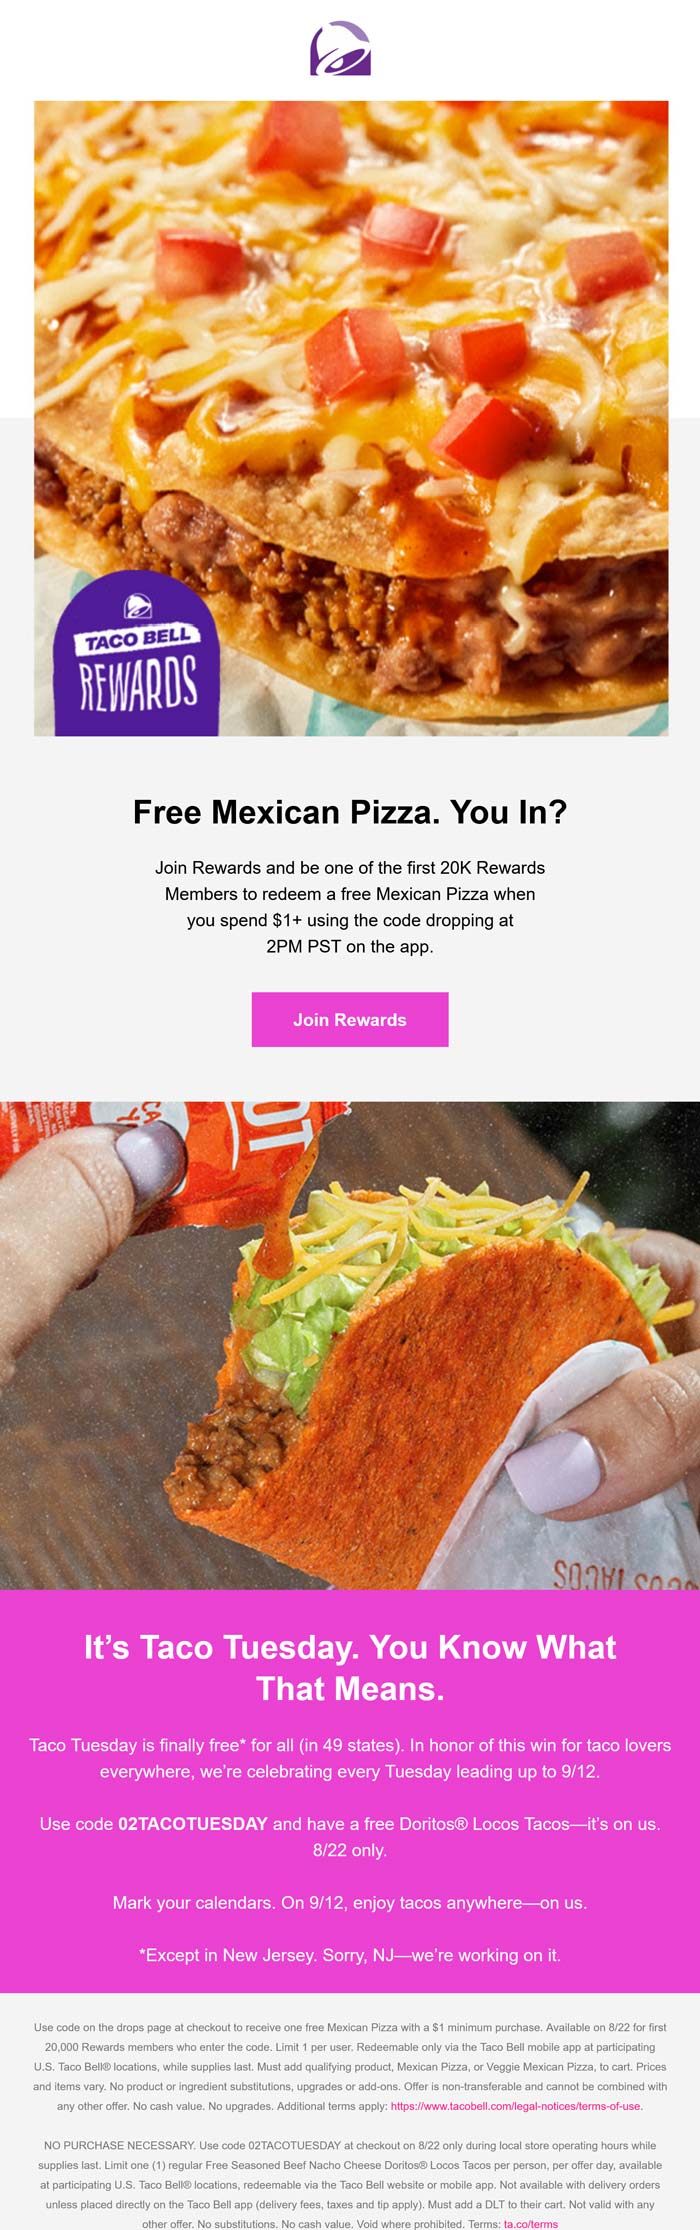 Taco Bell restaurants Coupon  Free mexican pizza with $1 spent first 20k today at Taco Bell #tacobell 